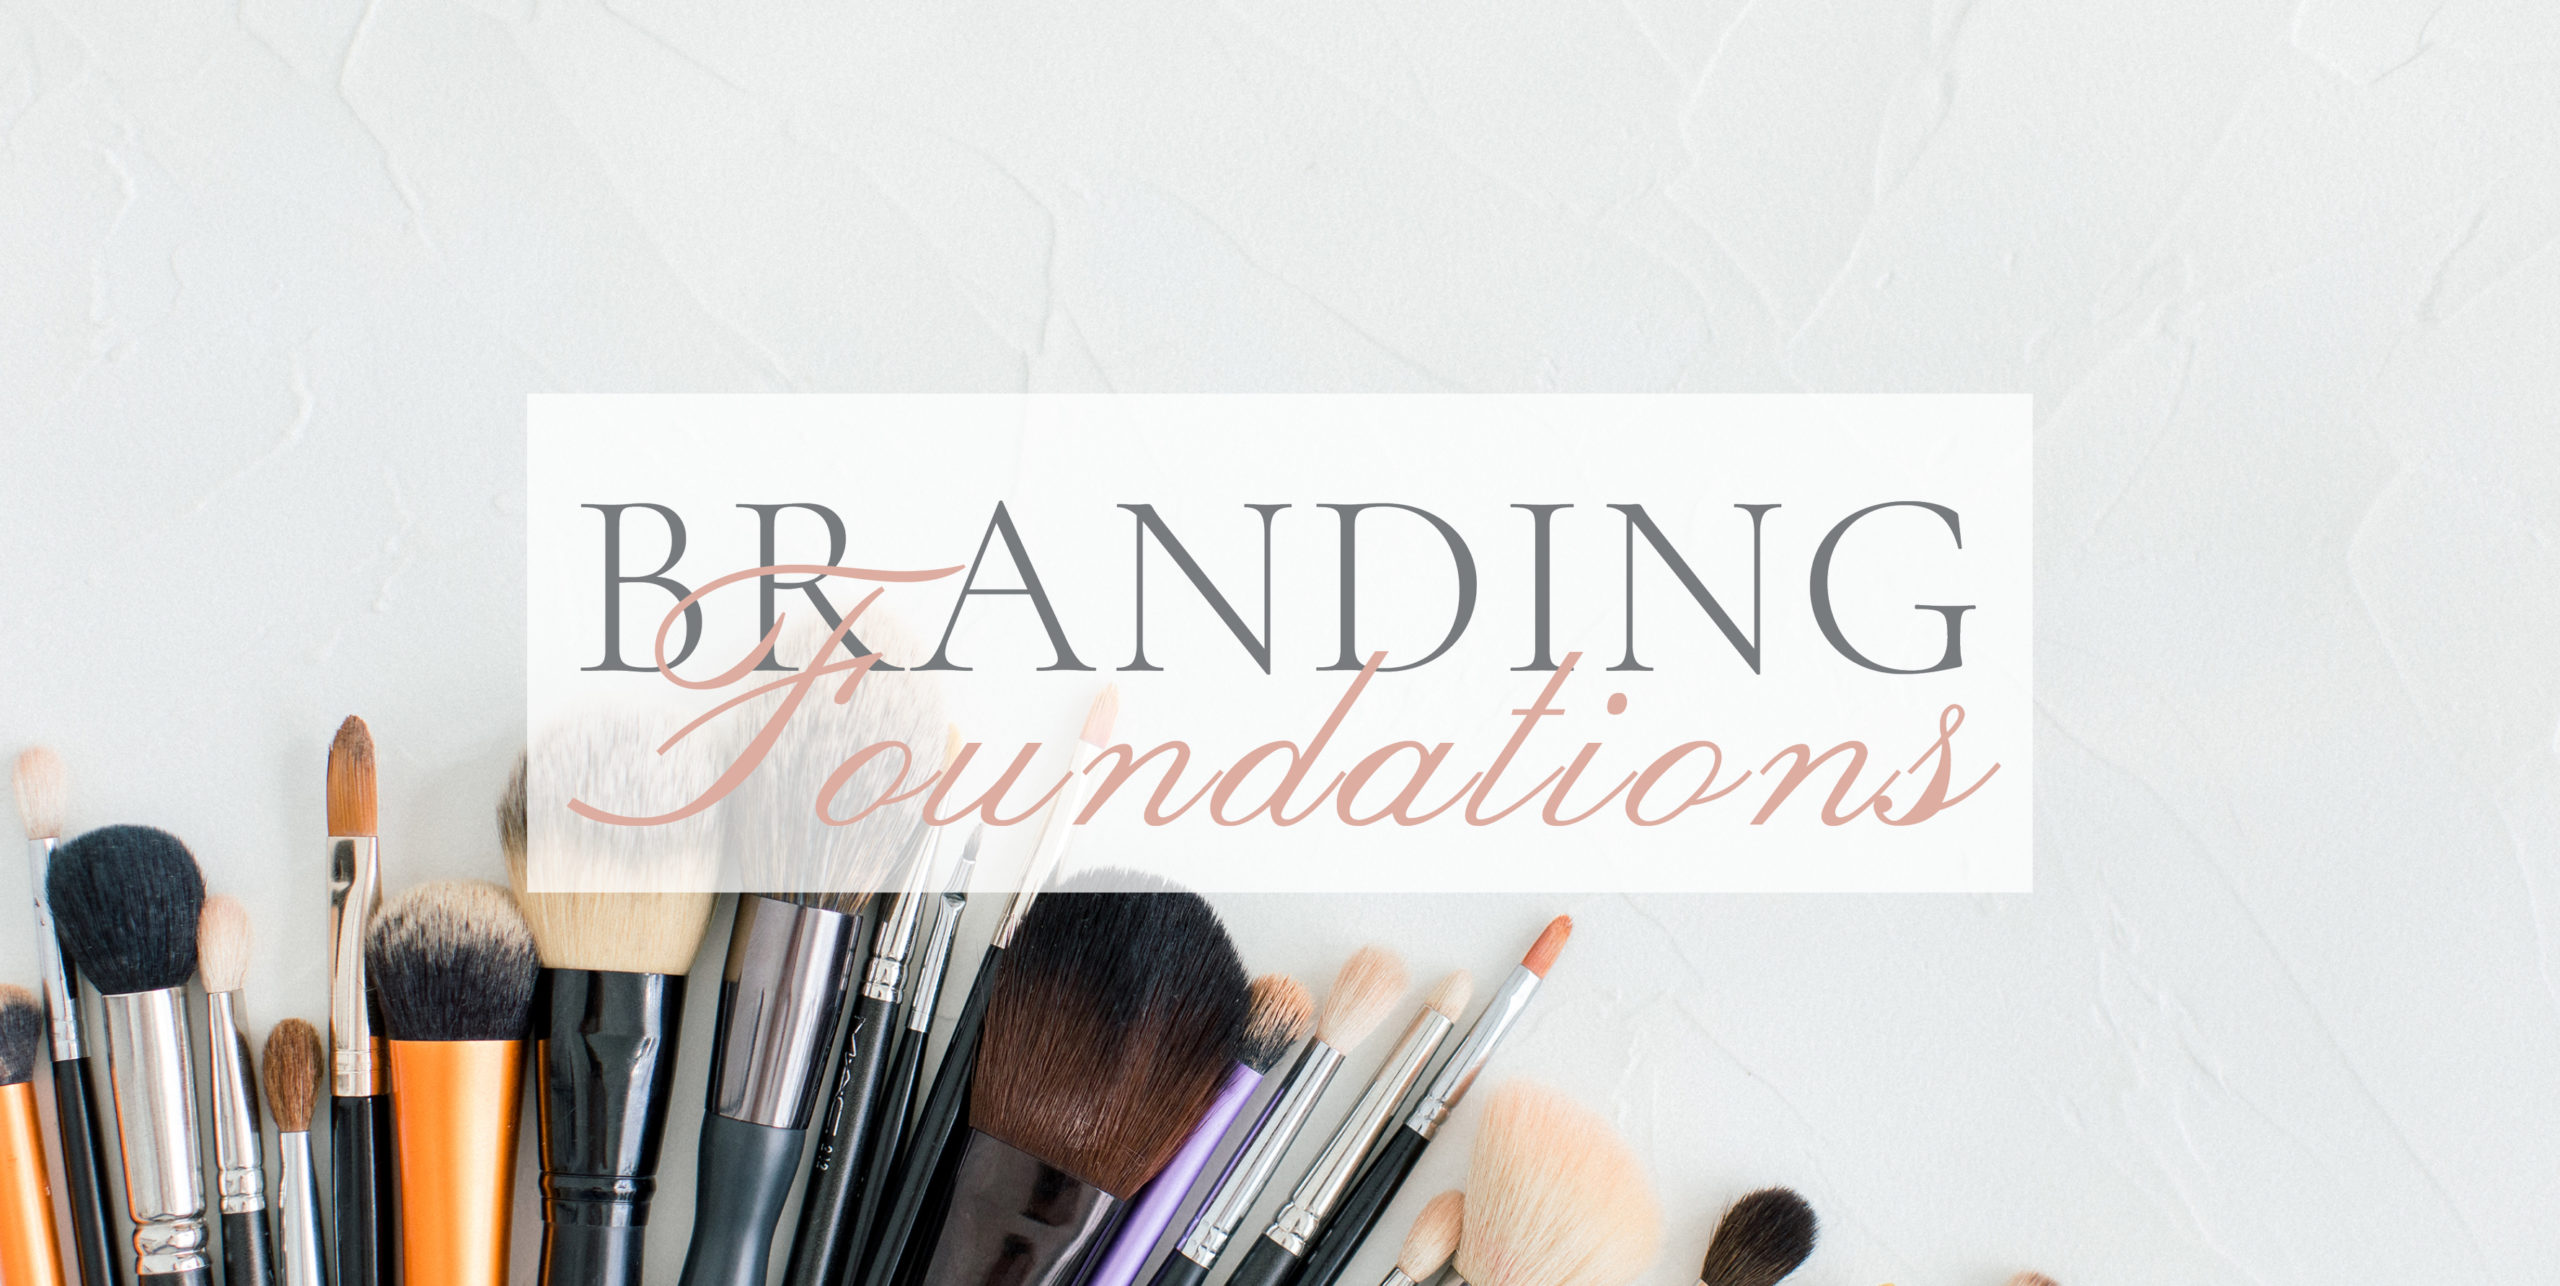 Branding Foundations course for creative small business owners | by Abby Grace